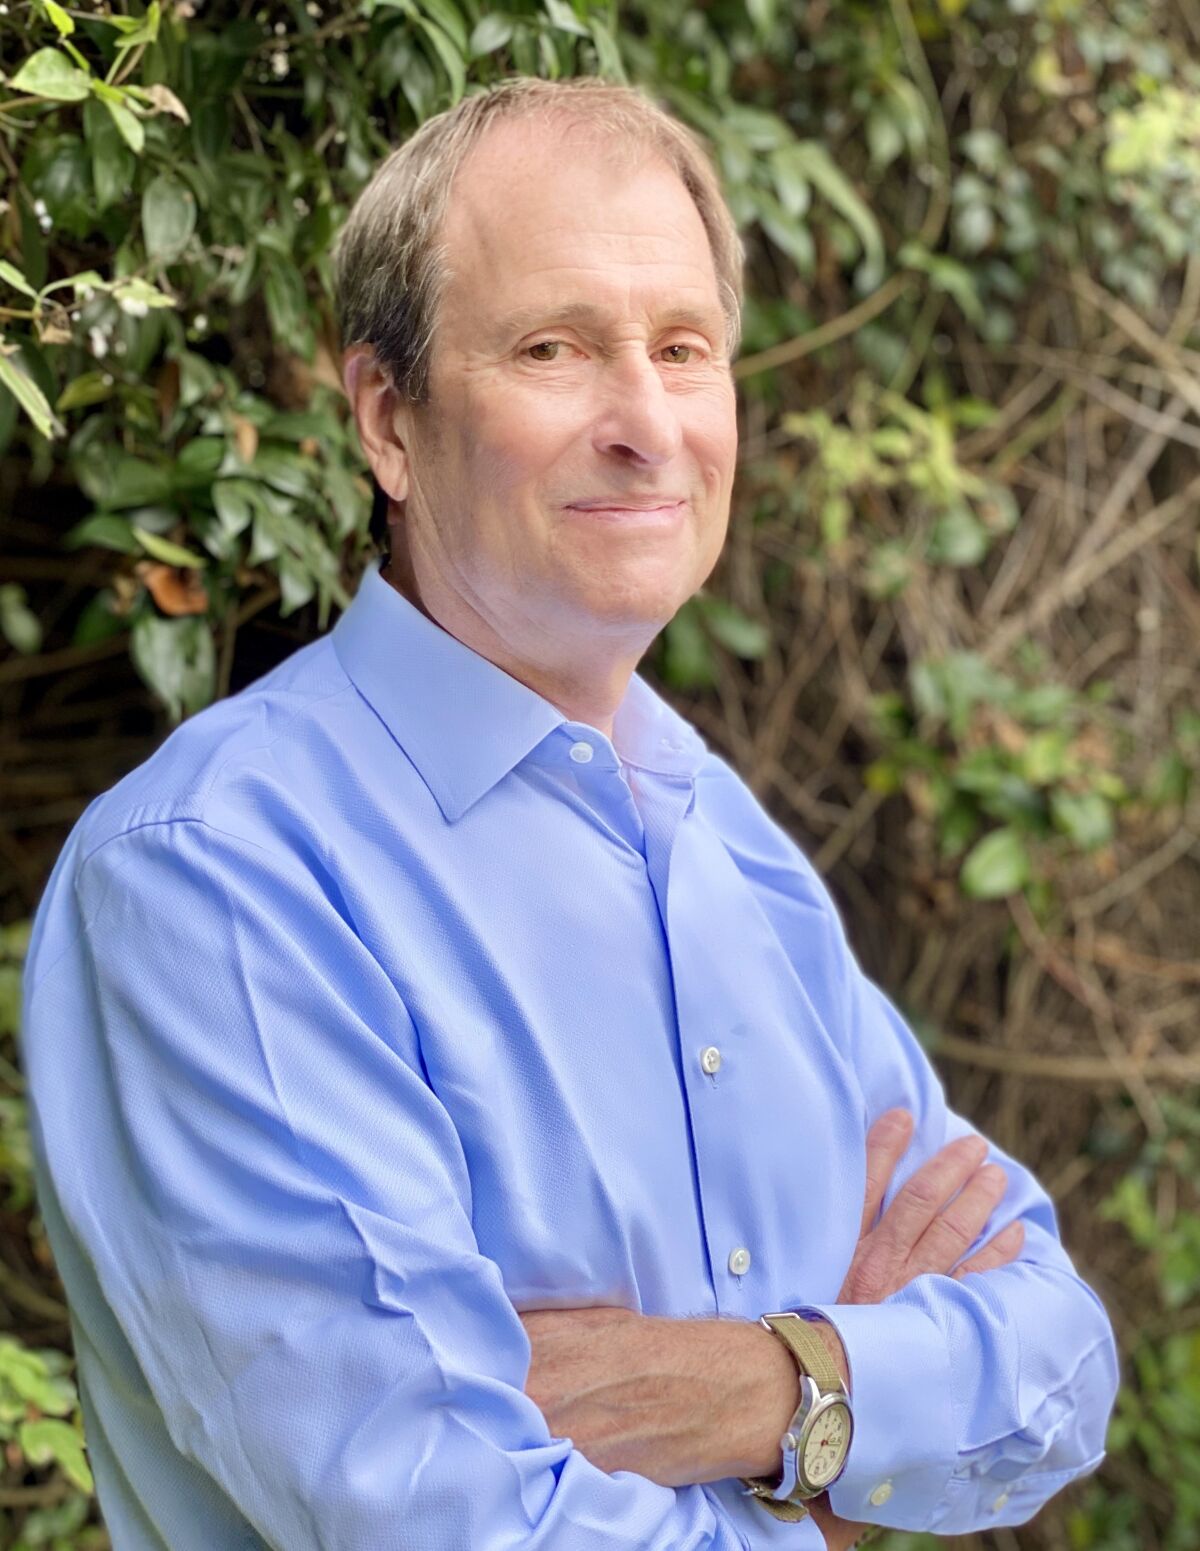 Carlsbad Unified School Board candidate Frank Deming